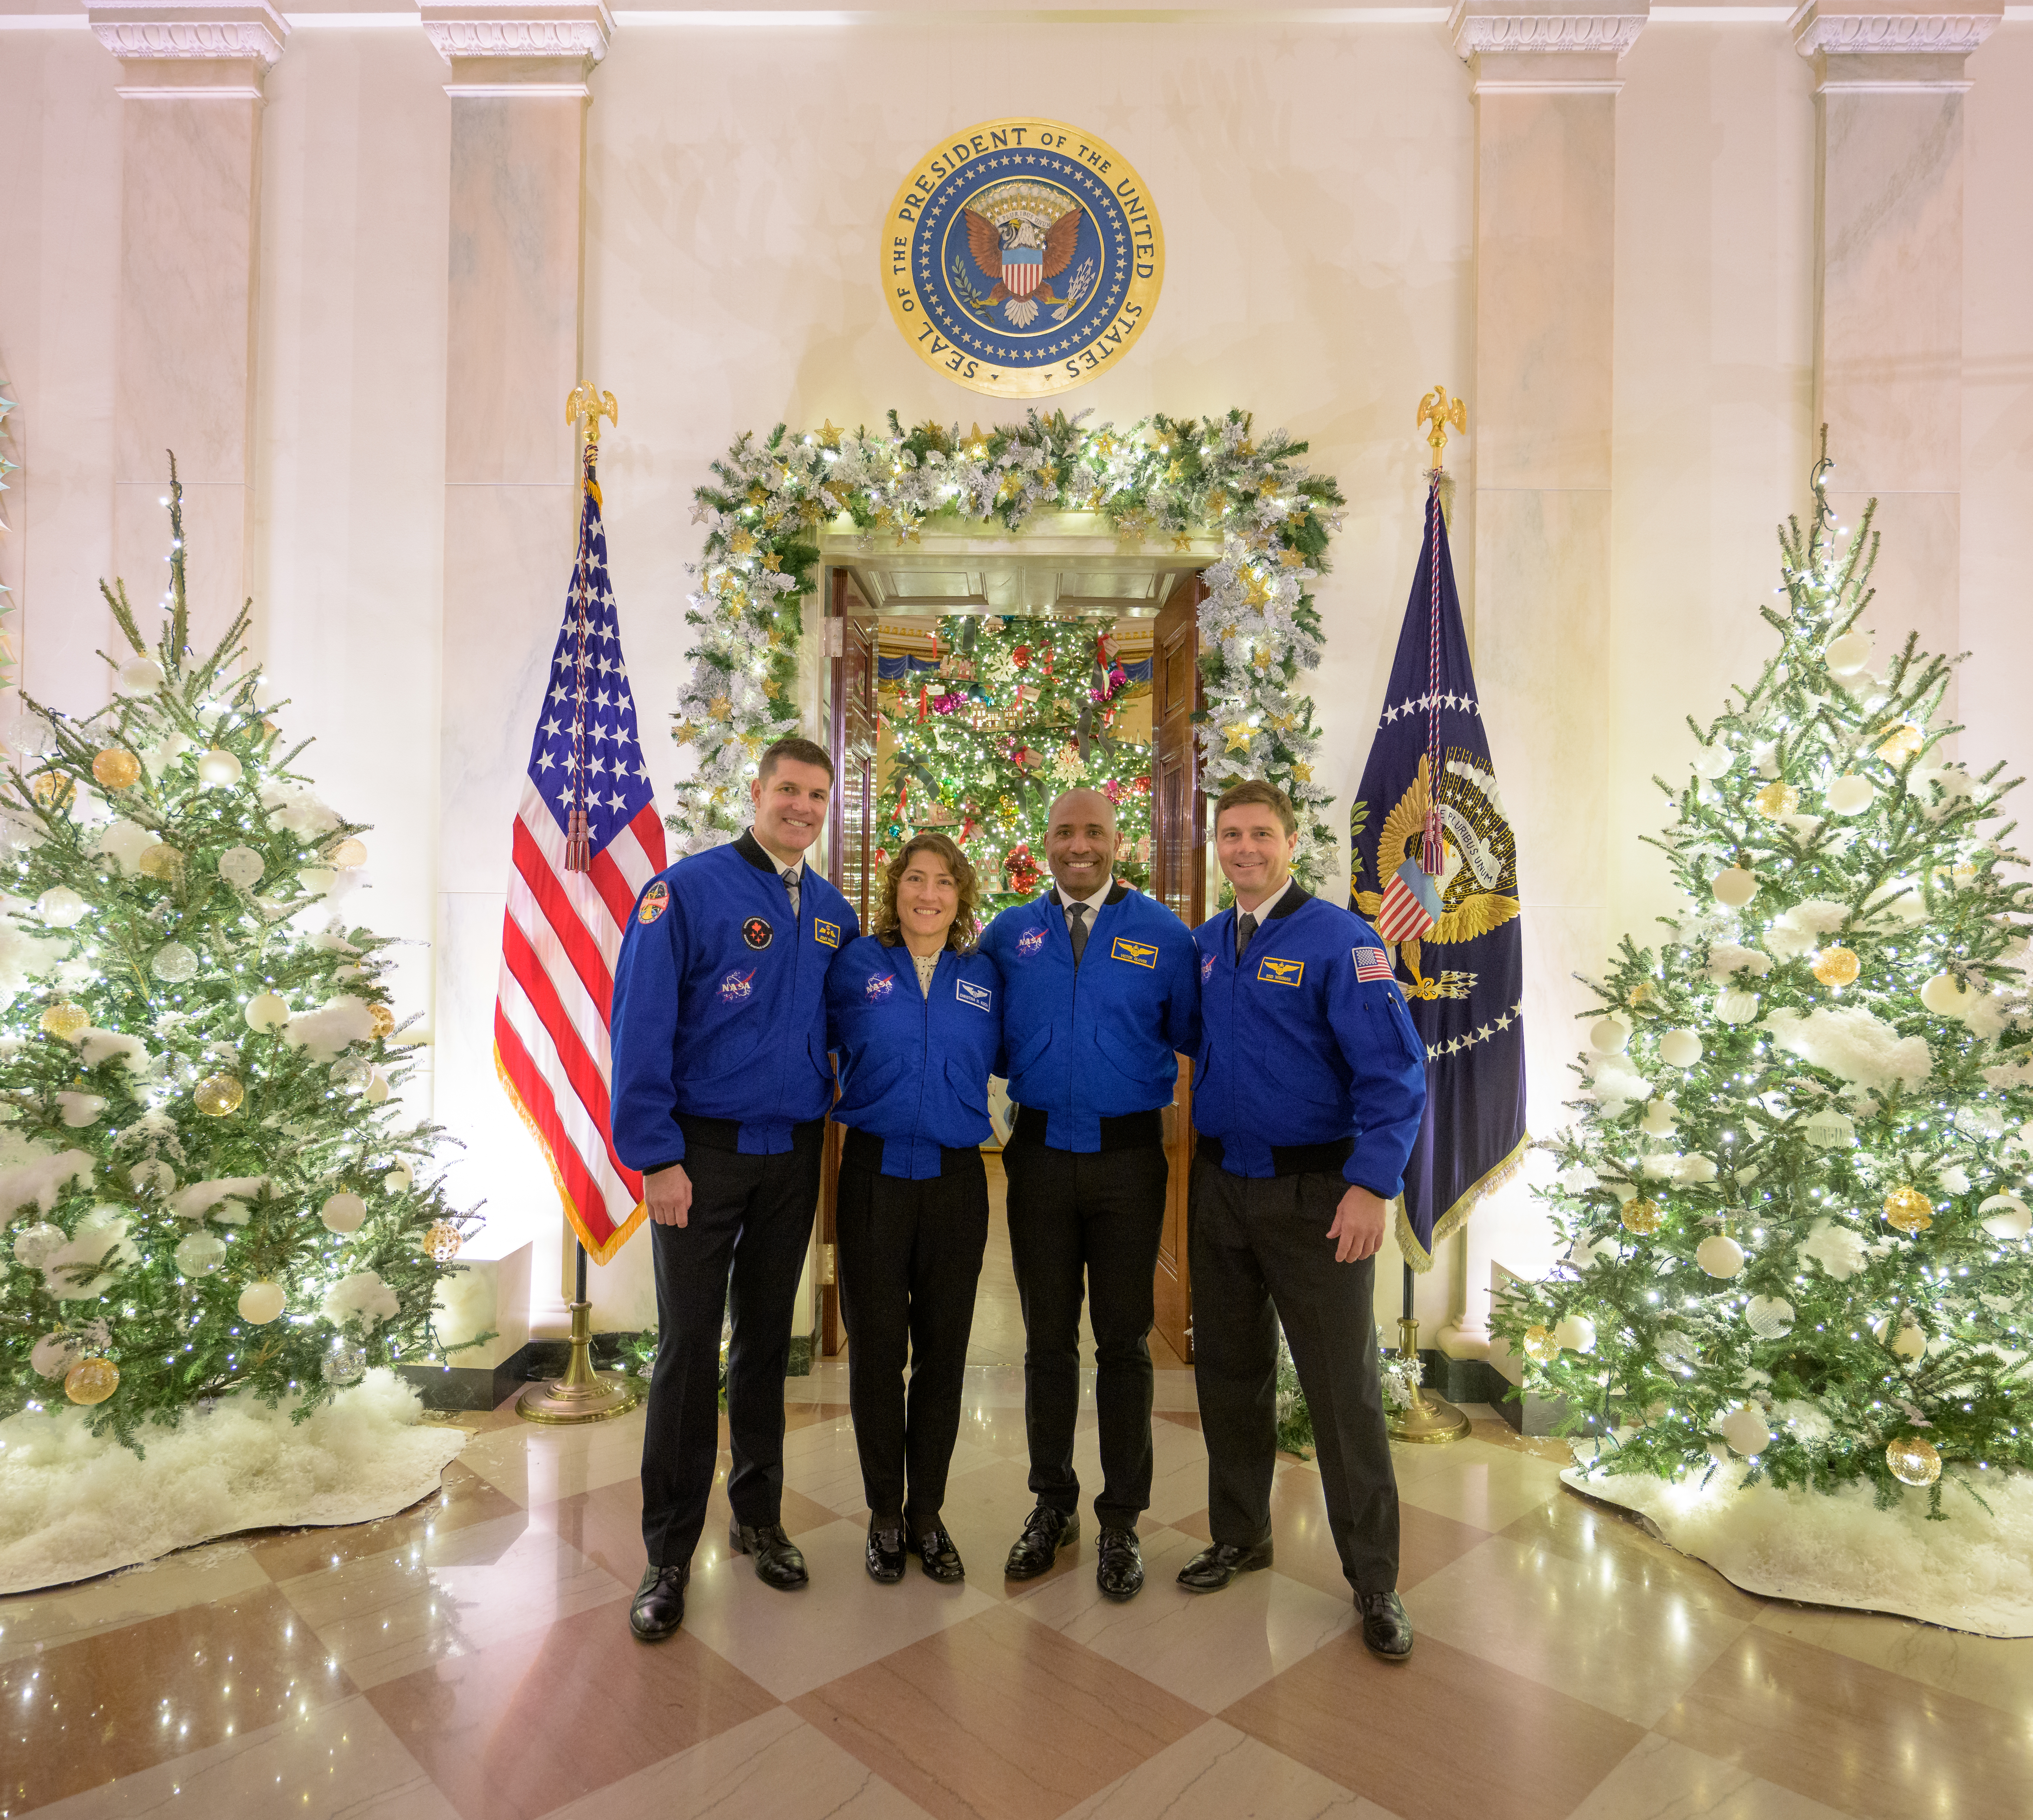 Four astronauts, wearing blue jackets and black pants, pose for a photo at the White House in front of decorations like trees, wreaths, and boughs. The astronauts, members of the Artemis II mission, have their arms around each other's shoulders. Behind them are two flags, and a seal high on the wall that reads "Seal of the President of the United States."